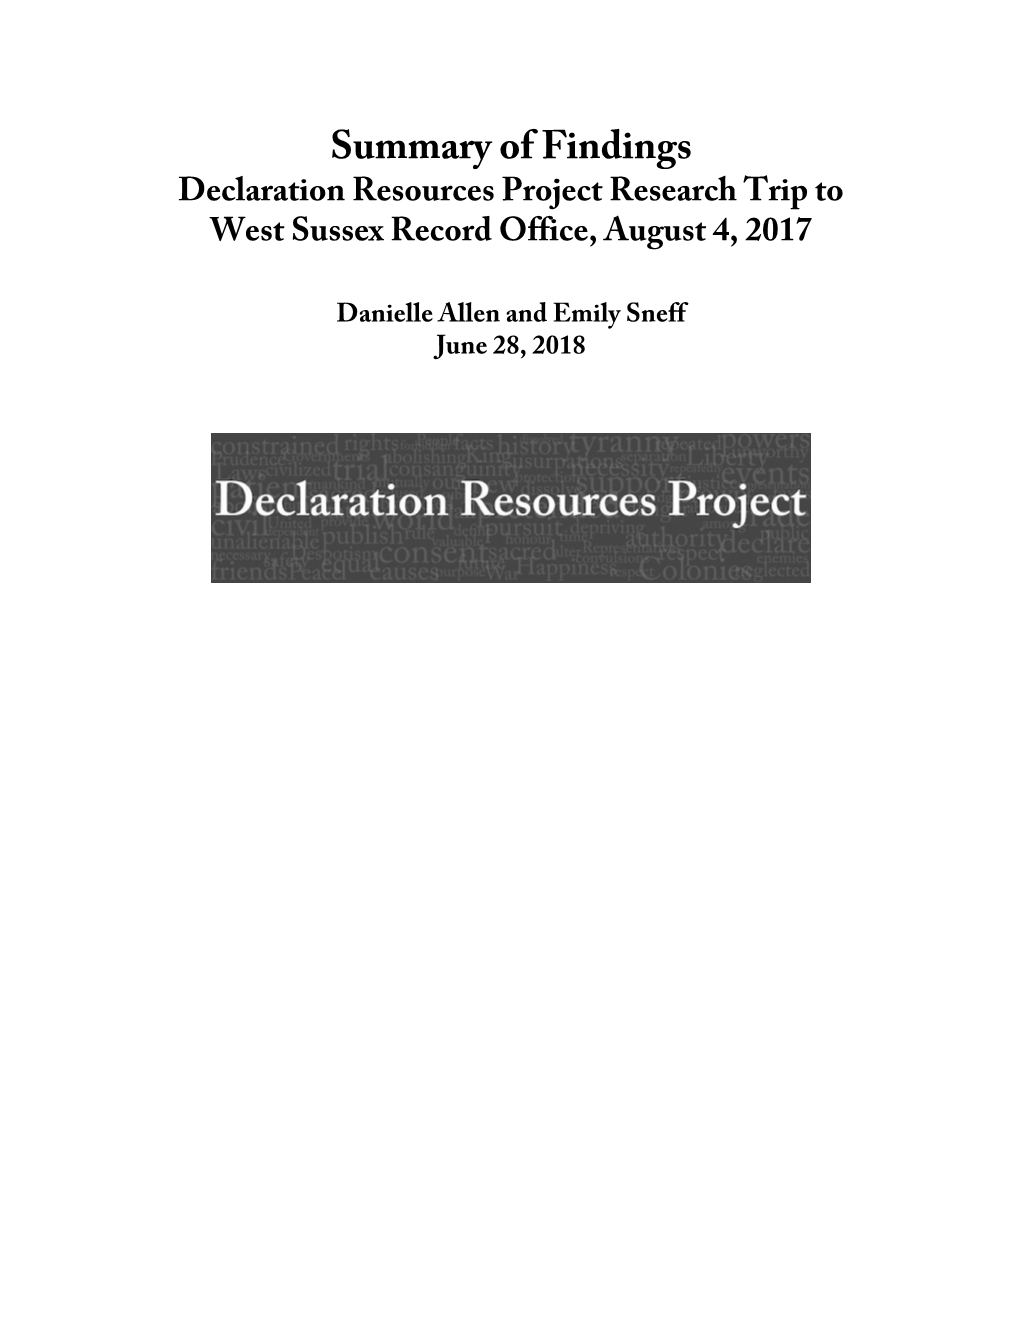 Declaration Resources Project, Summary of Research Trip, August